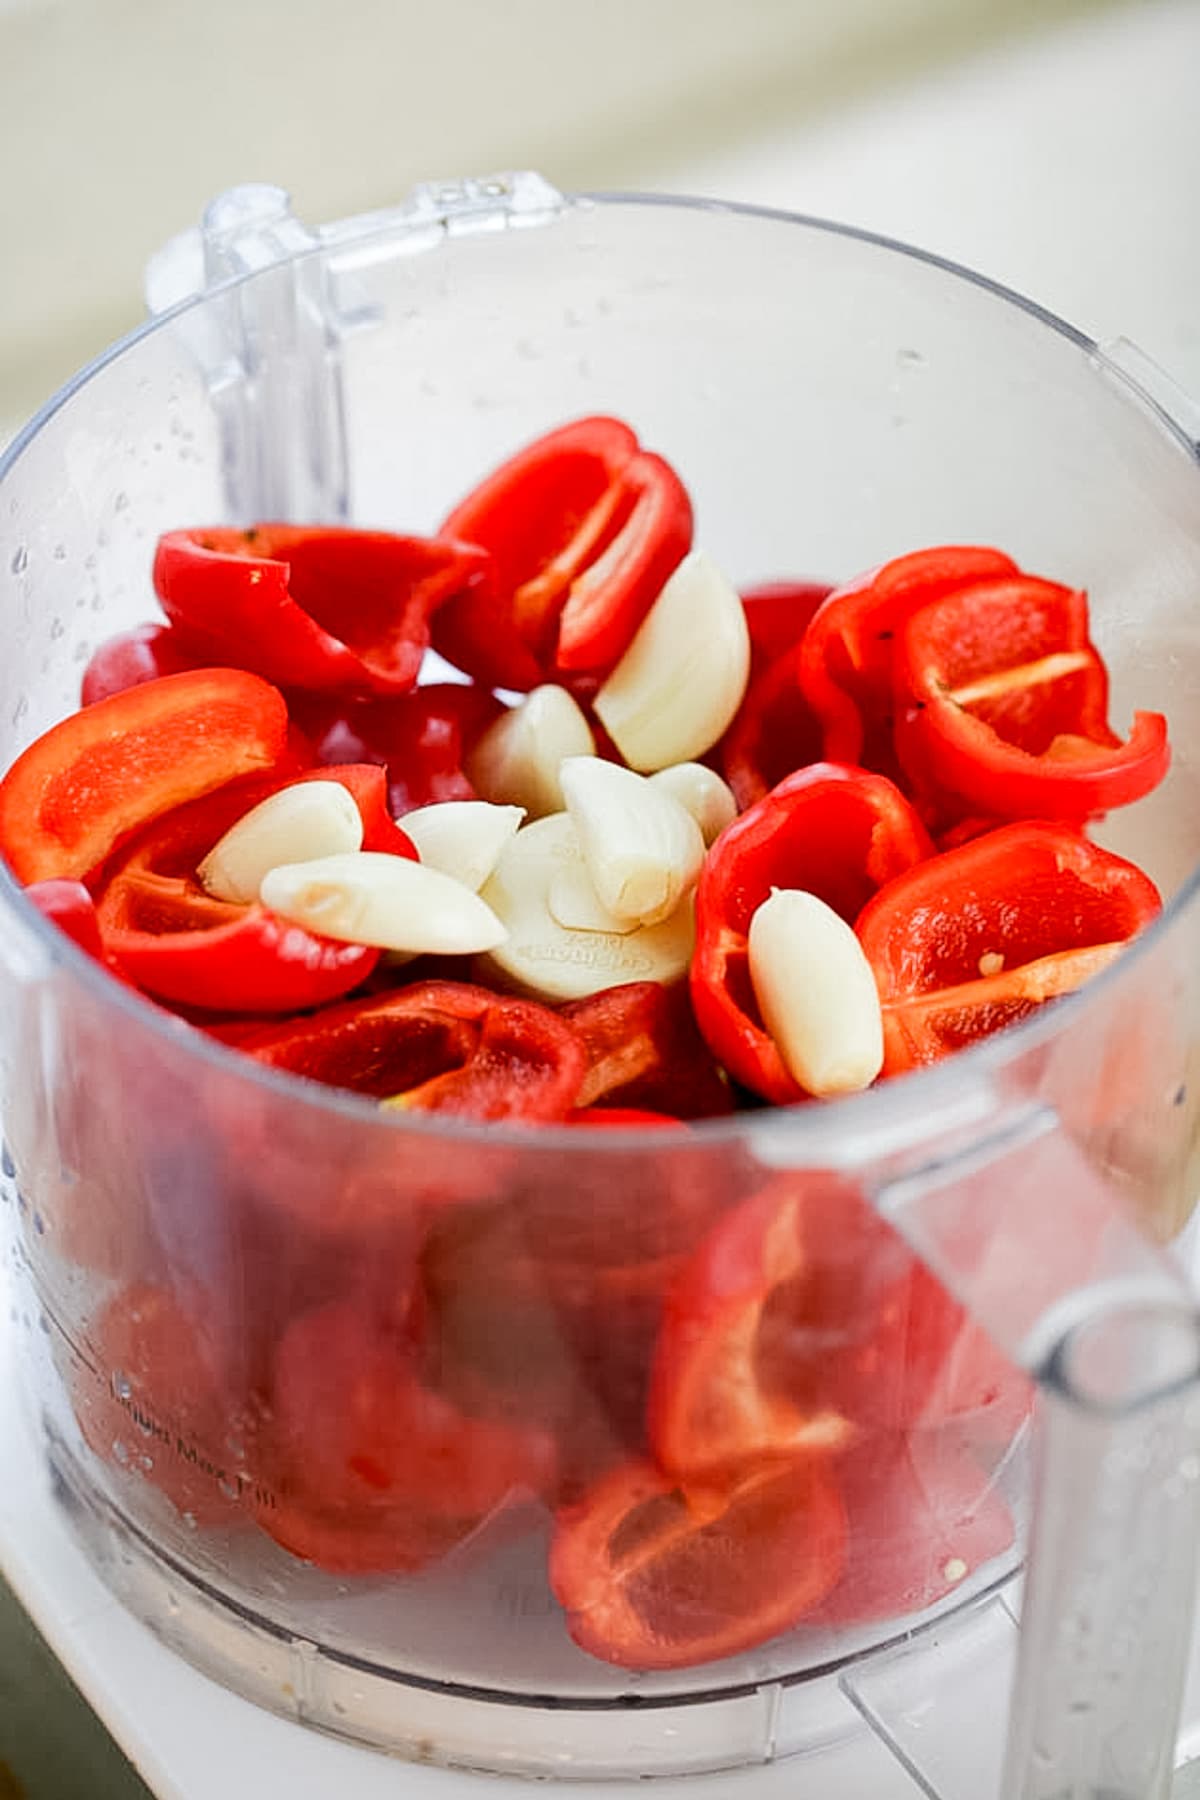 peppers and garlic in the food processor